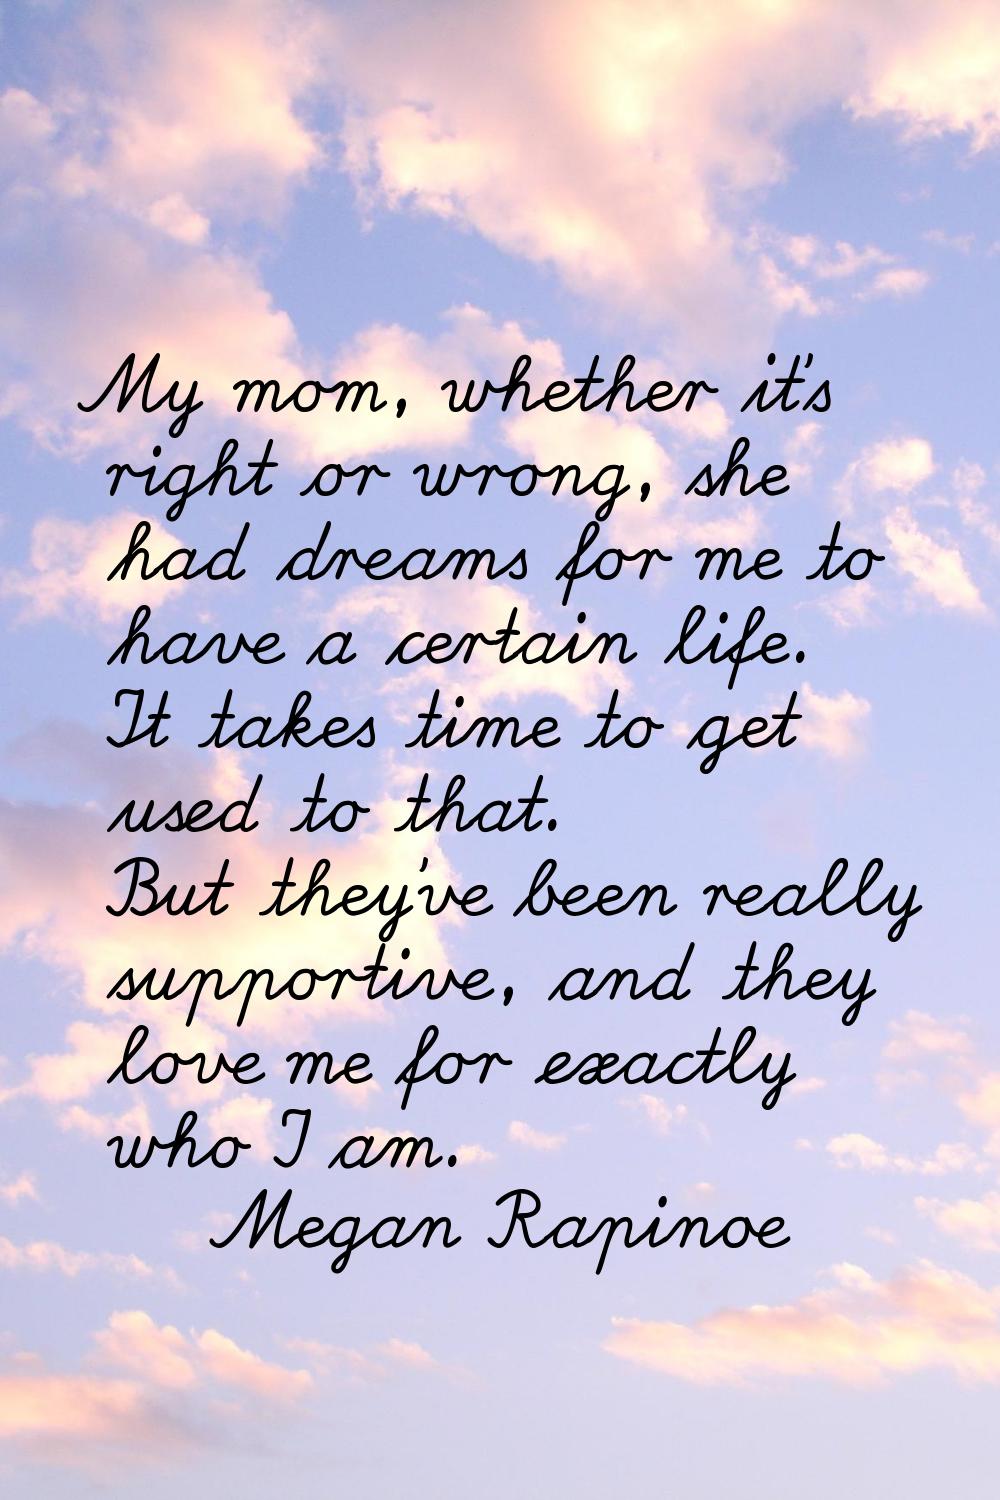 My mom, whether it's right or wrong, she had dreams for me to have a certain life. It takes time to